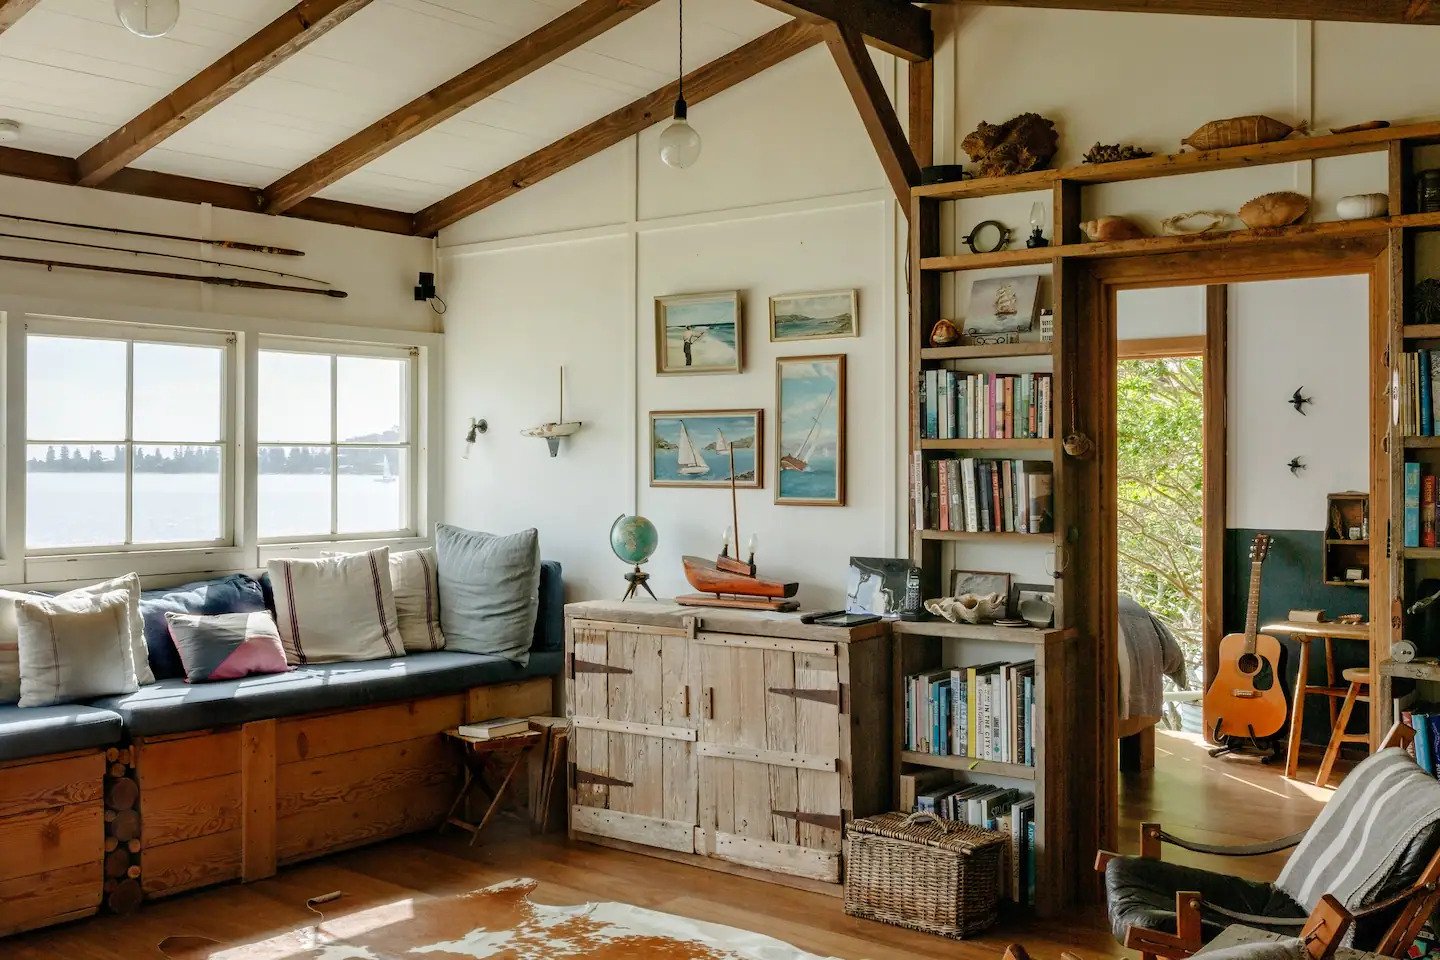 Little Black Shack is one of the best Airbnb cabins near Sydney.